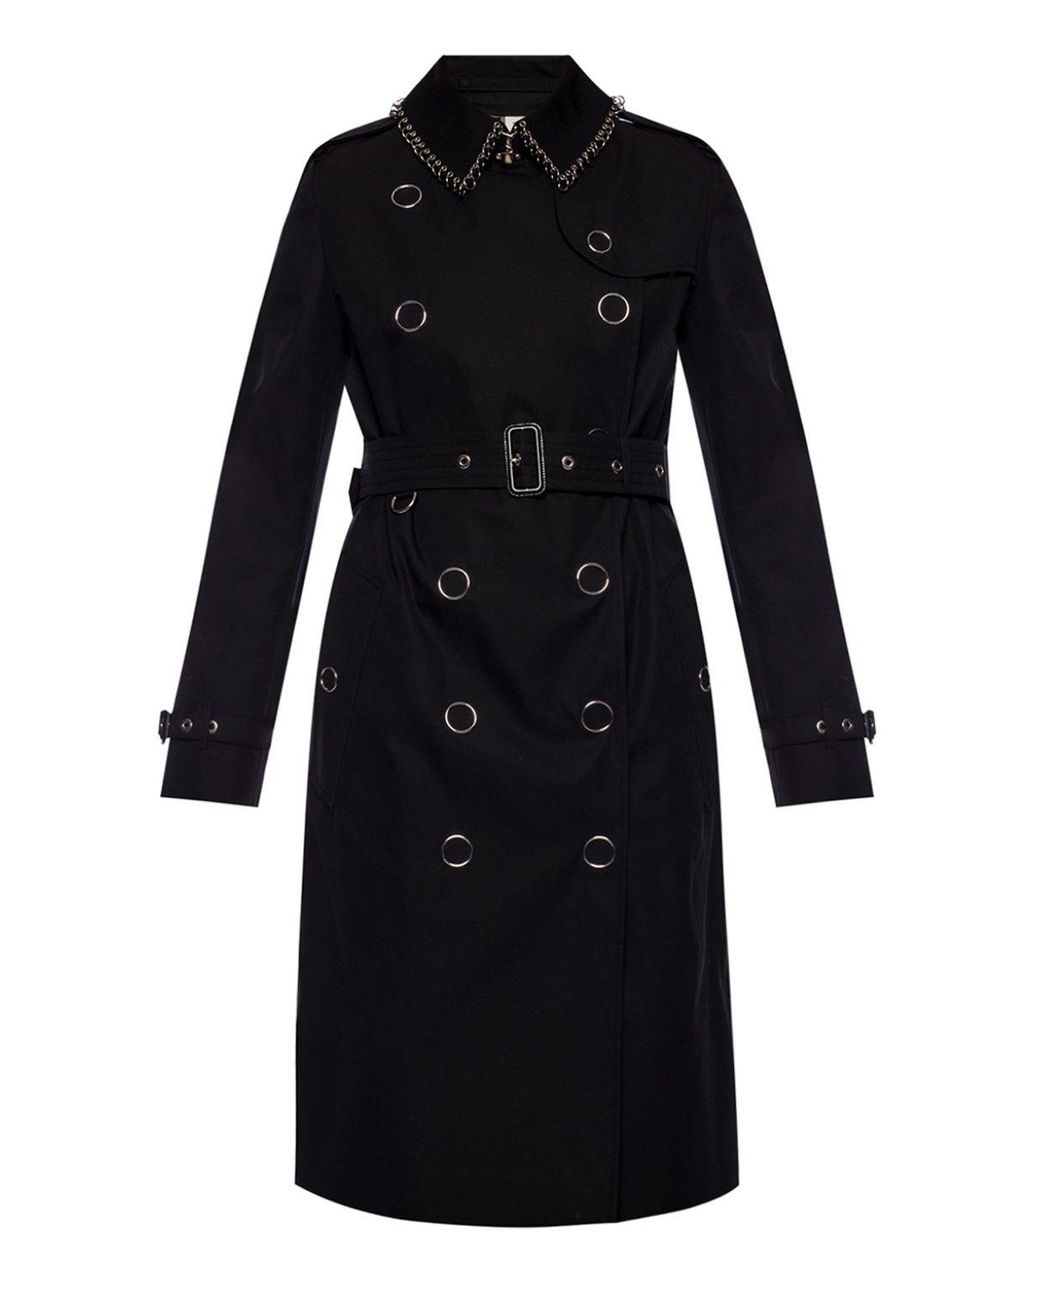 Burberry Cotton Double-breasted Trench Coat With Belt in Black - Lyst